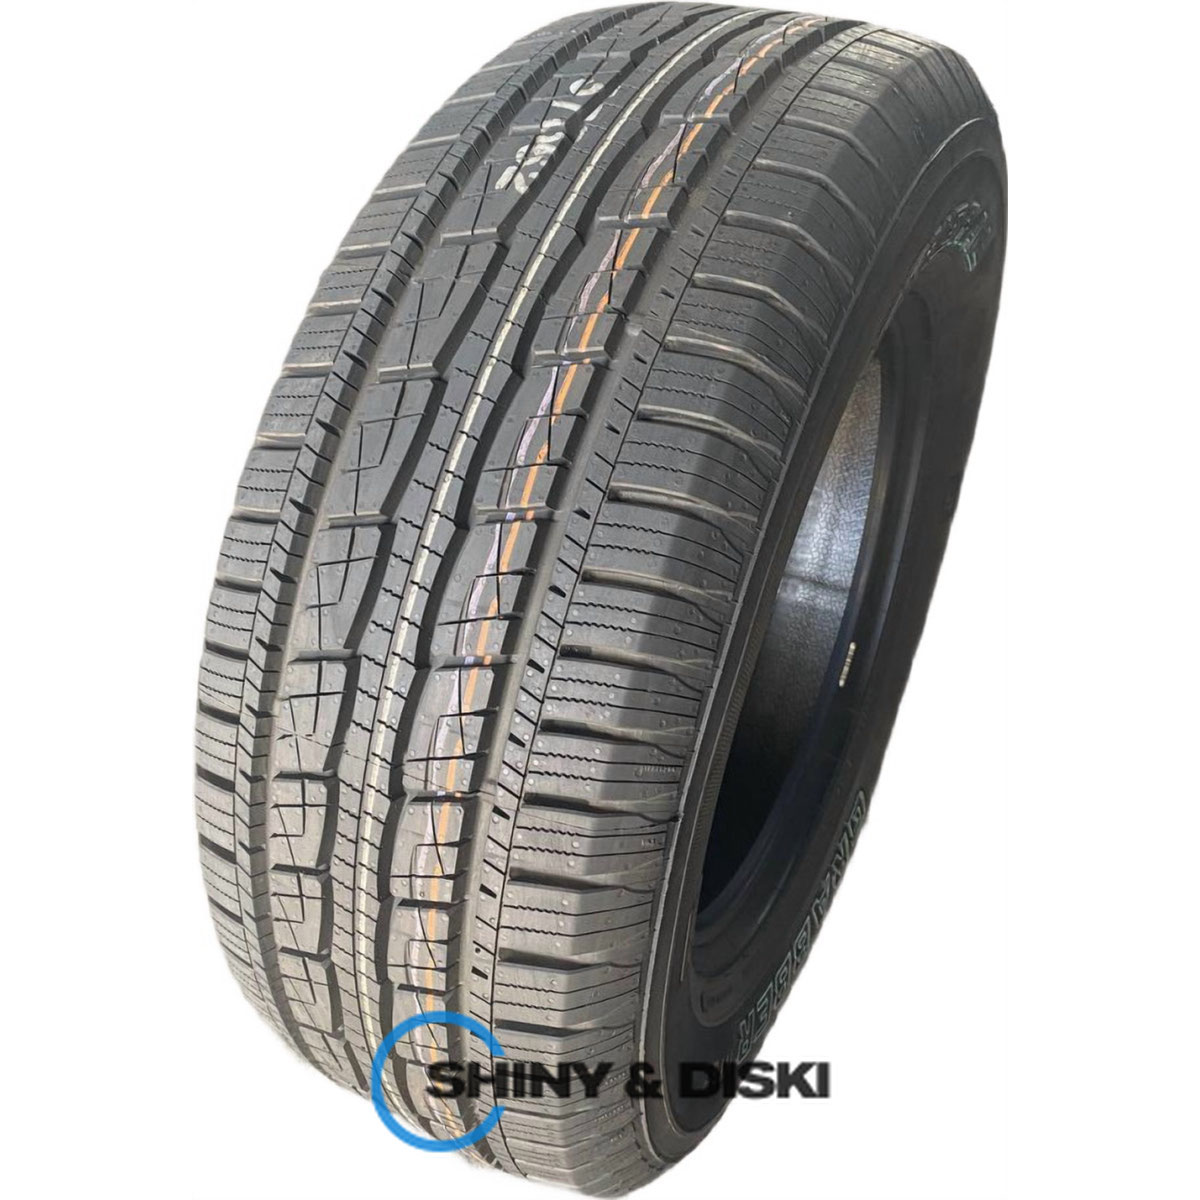 резина general tire grabber hts60 265/70 r18 116t owl